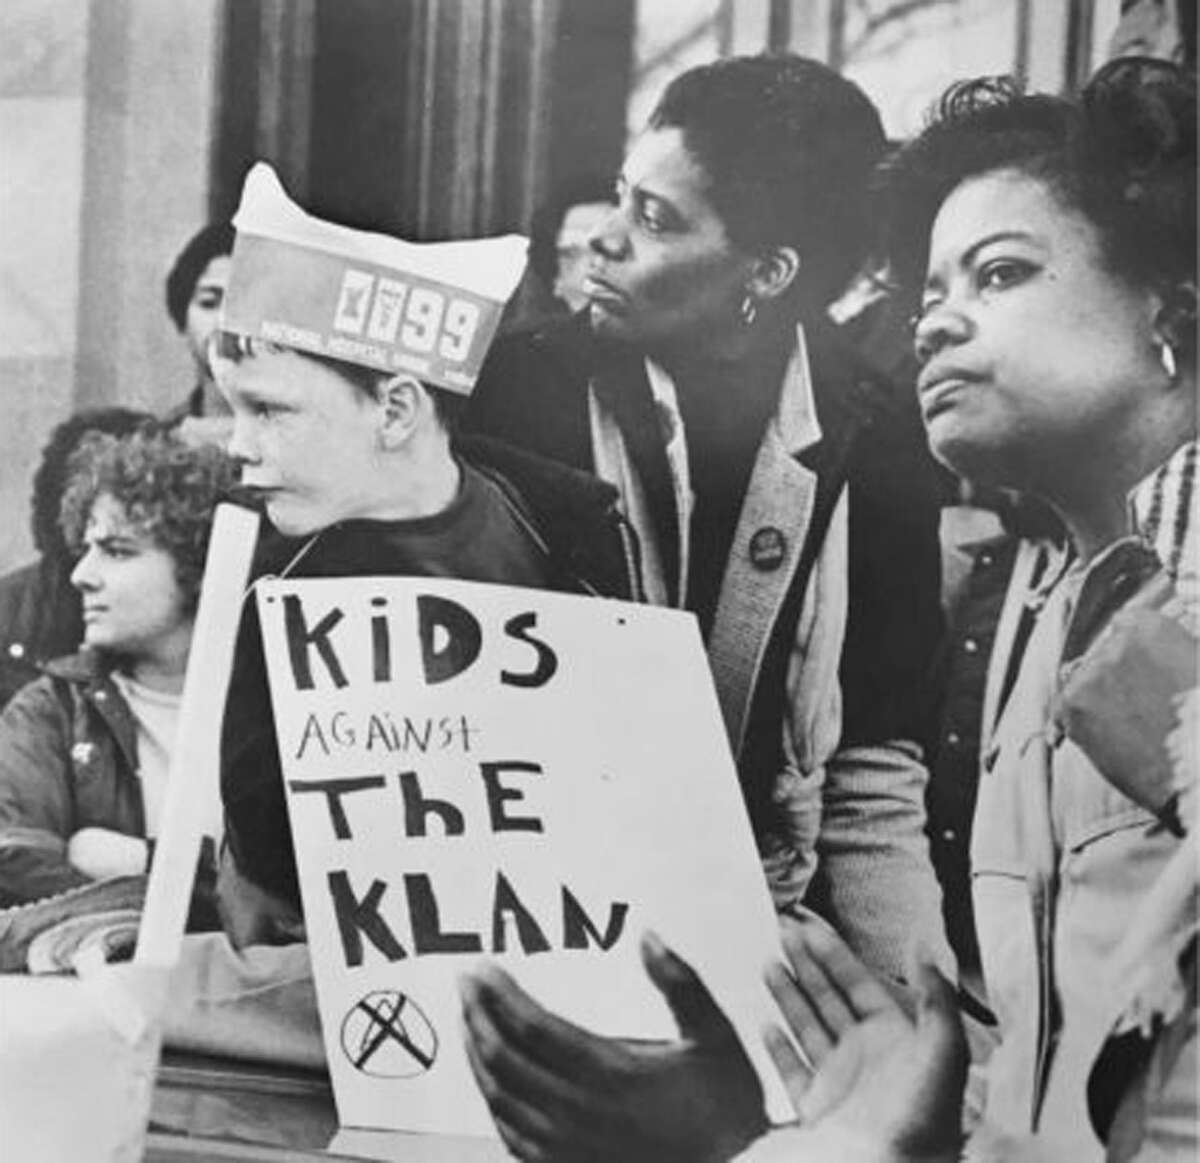 Some of the 2,000 participants in the "Unity Day: Stand Against the Klan" rally at the State Capitol in Hartford, March 20, 1983.